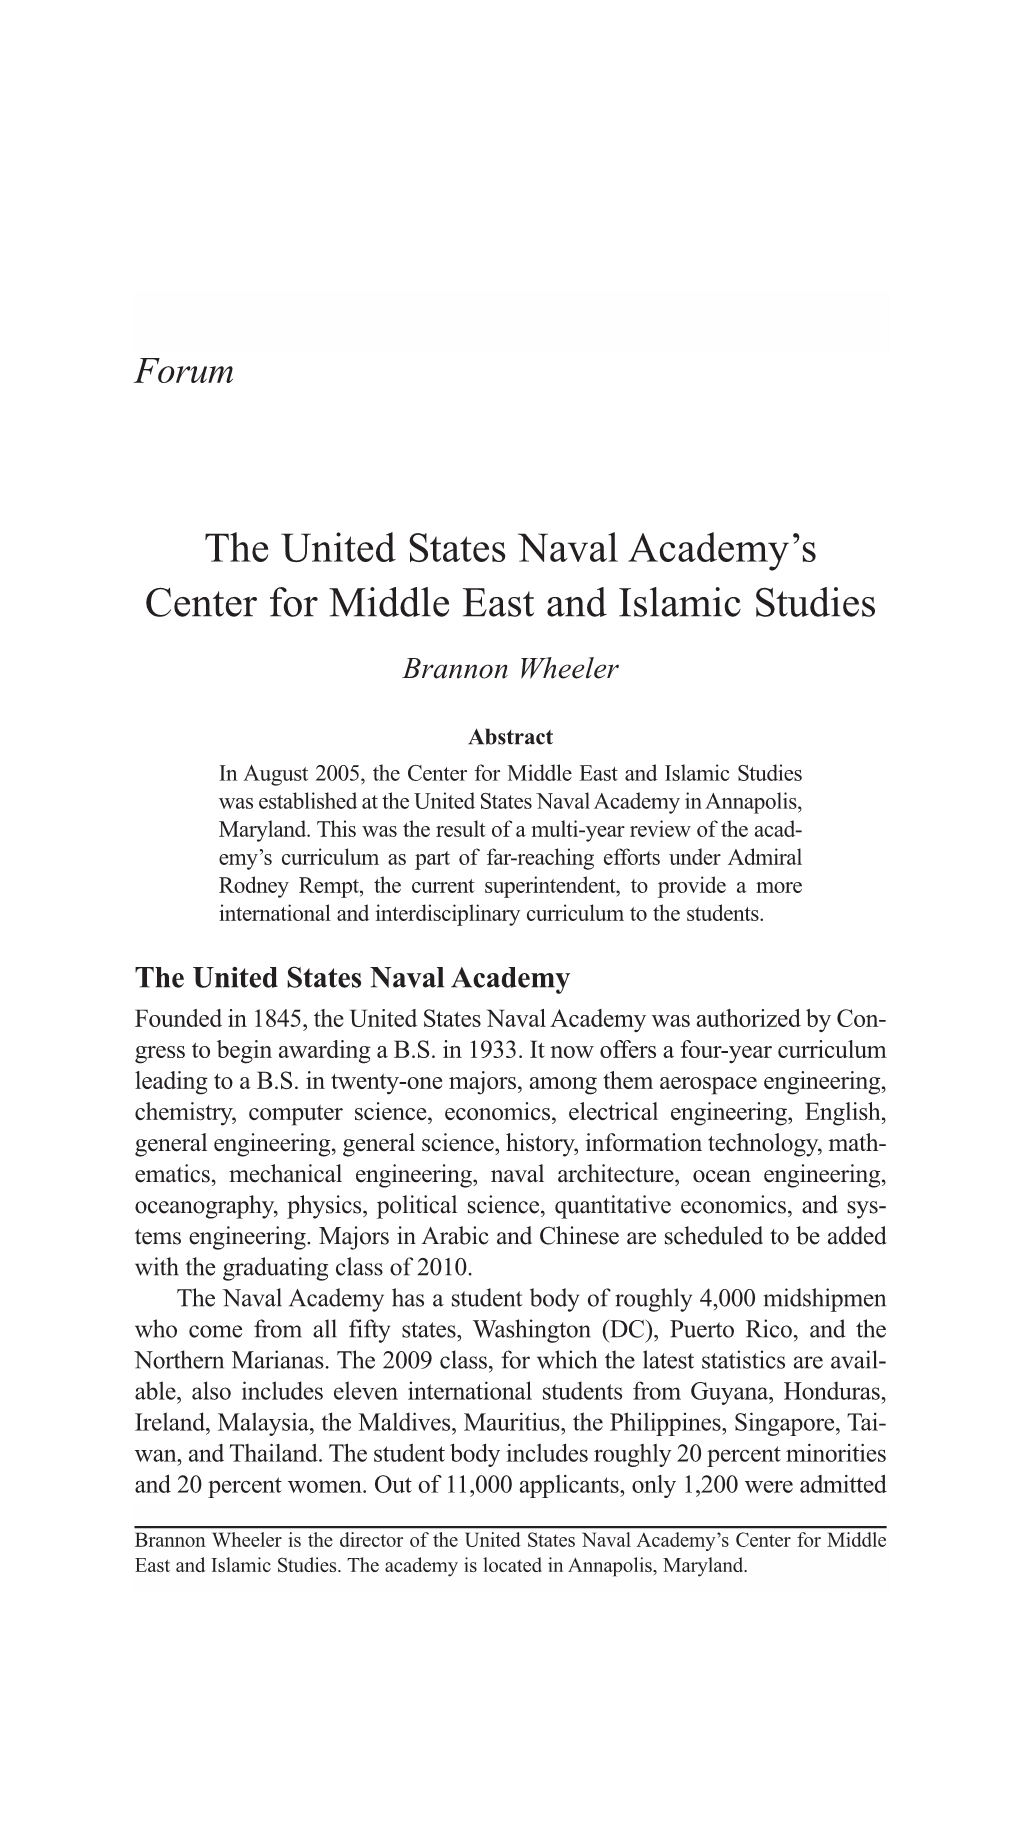 The United States Naval Academy's Center for Middle East and Islamic Studies